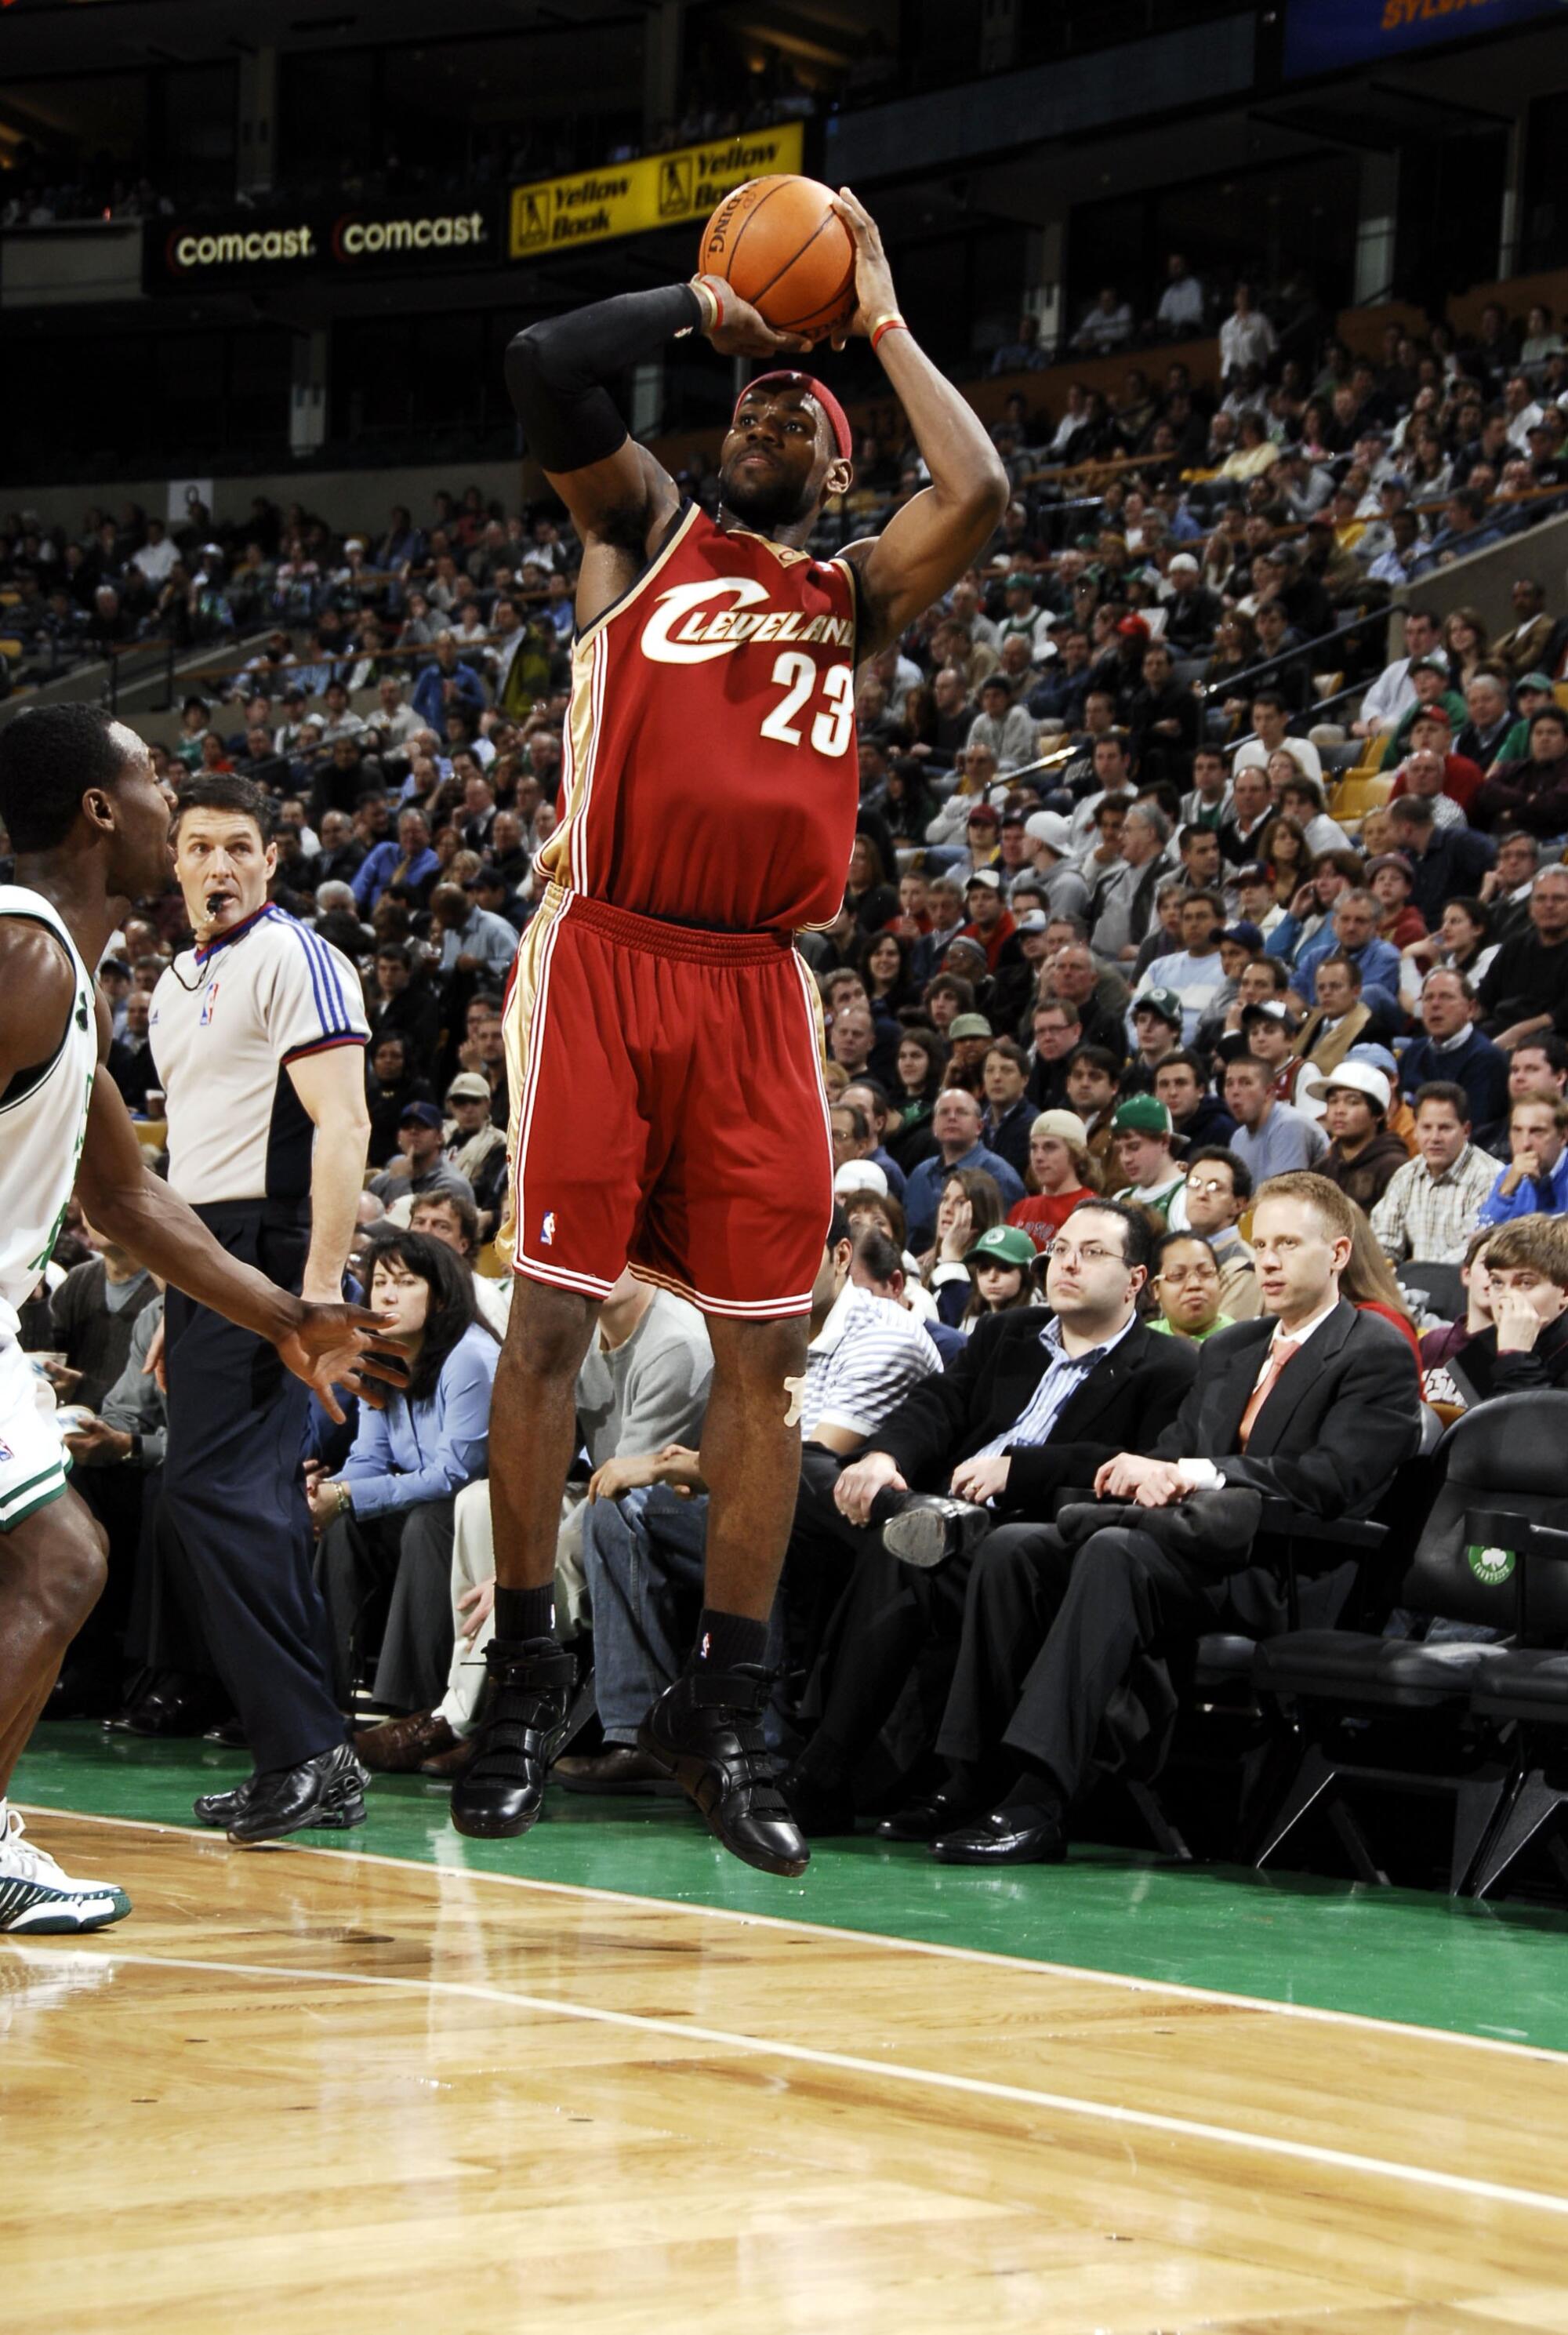 LeBron James pulls up for a jumper against the Celtics in Boston on Jan. 3, 2007.